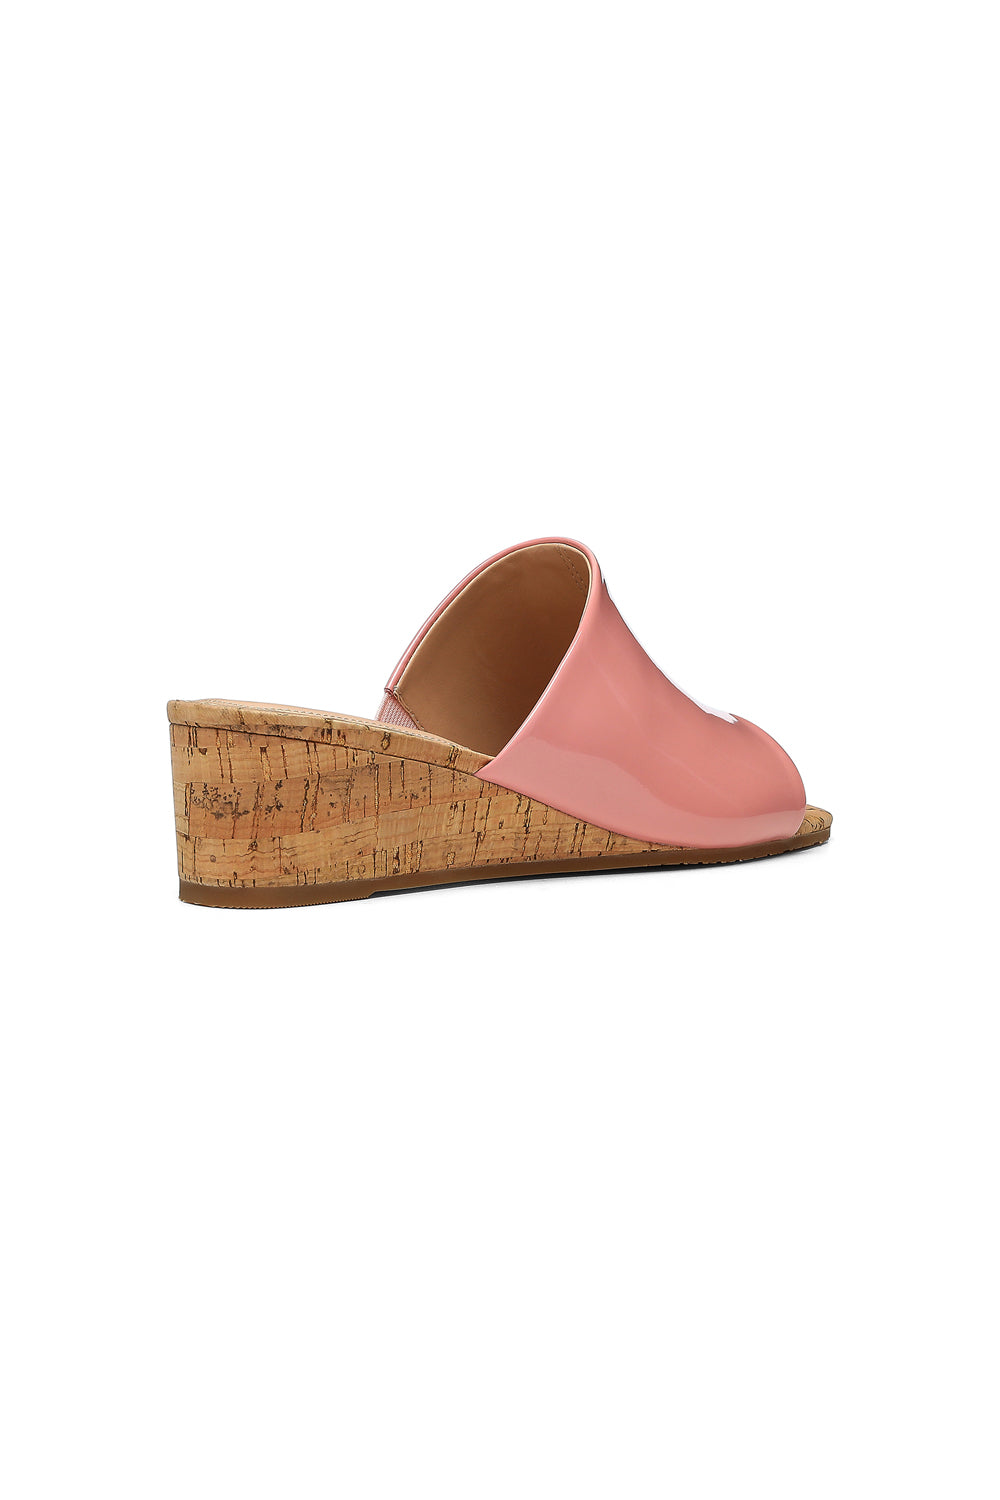 NYDJ Claudine Wedge Mule Sandals In Patent Leather - Blush Pink